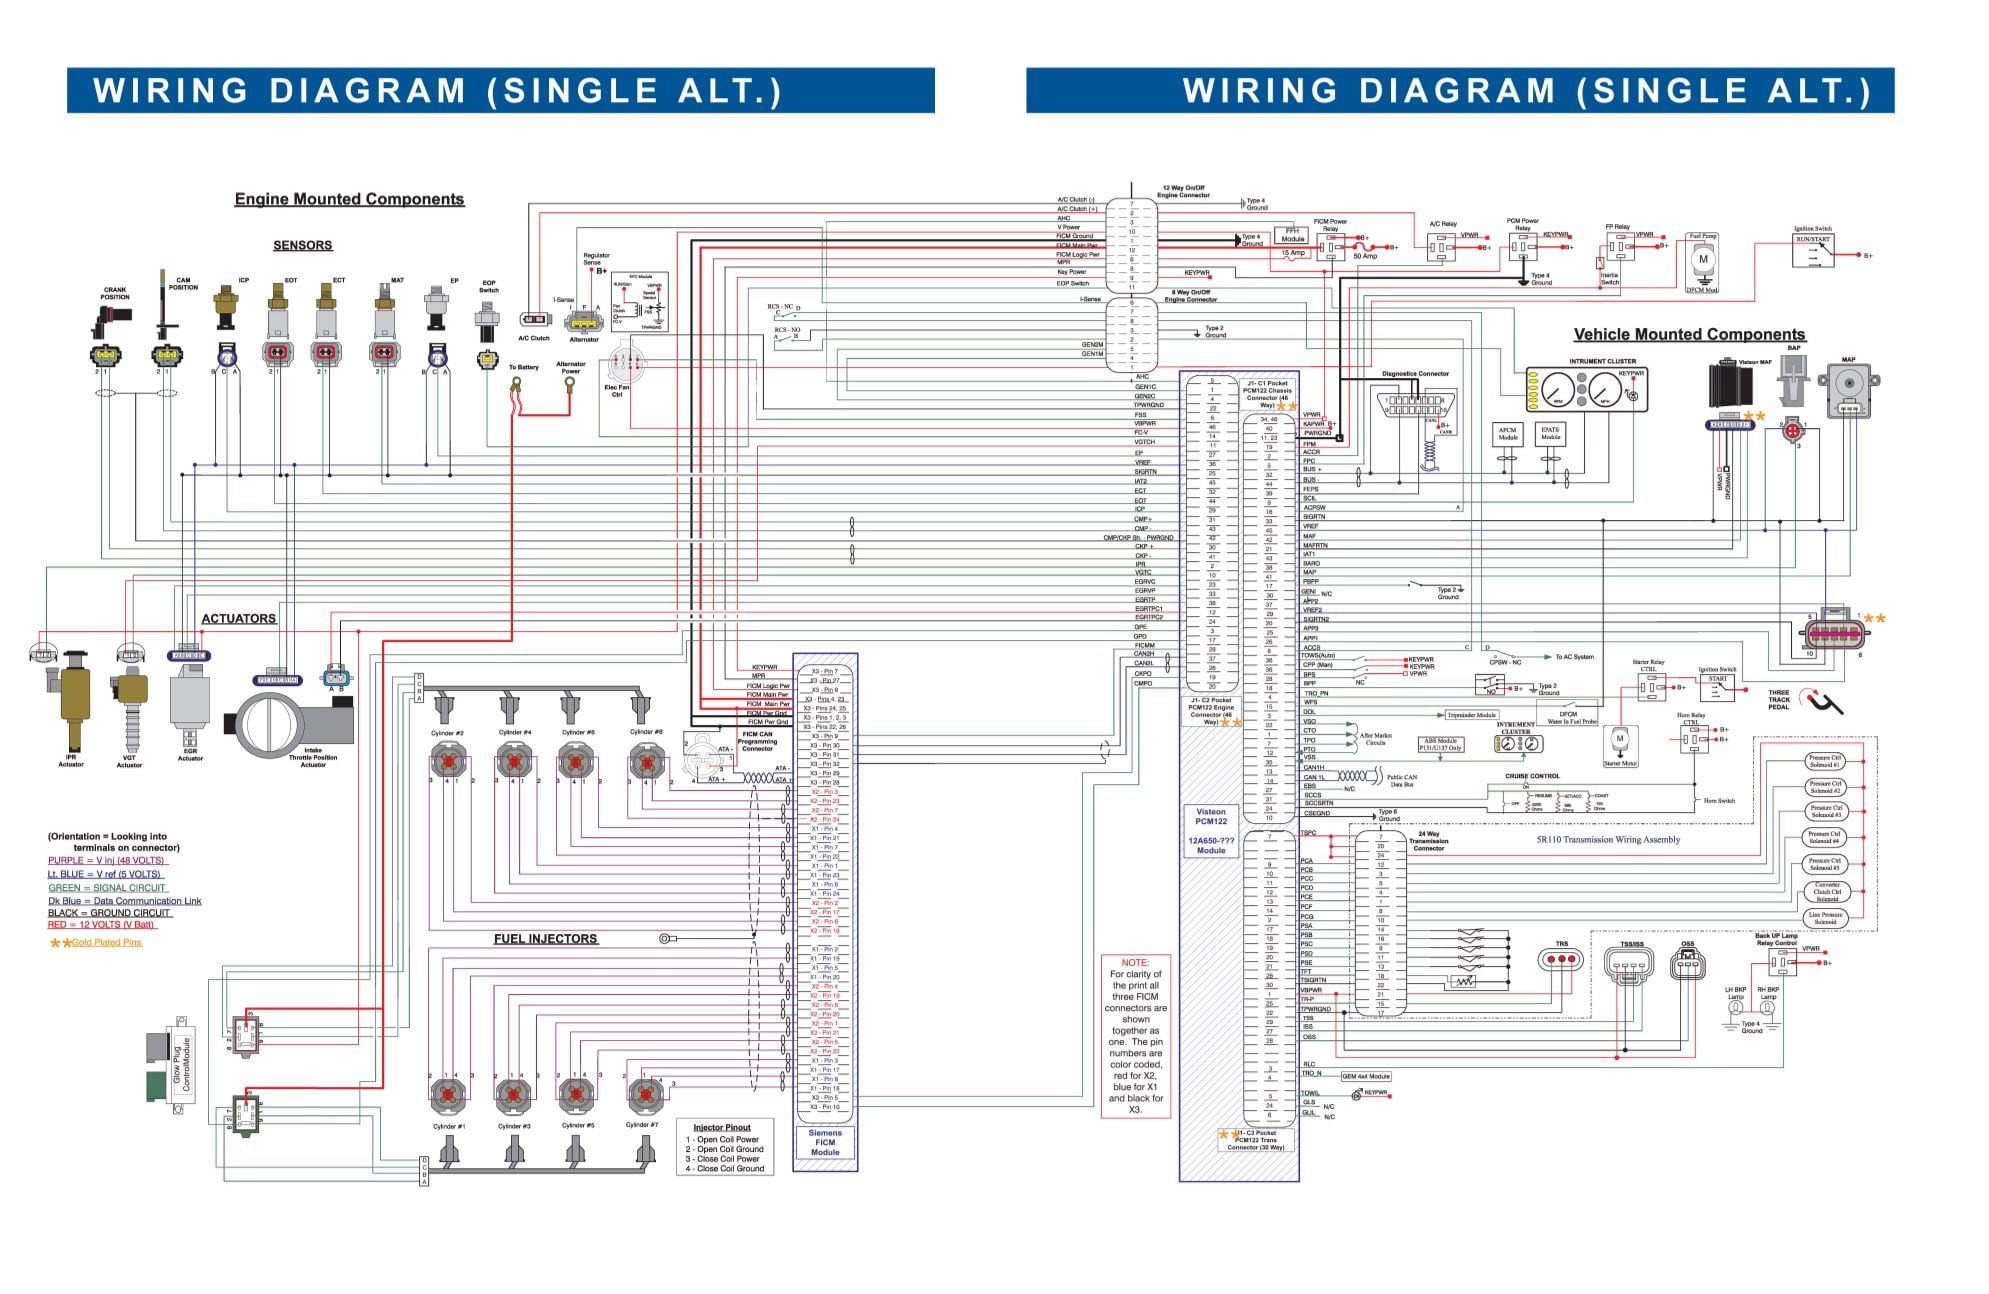 6.0 middle PCM connector - Ford Truck Enthusiasts Forums  2005 Ford 6.0 Ipr Wiring Diagram    Ford Truck Enthusiasts